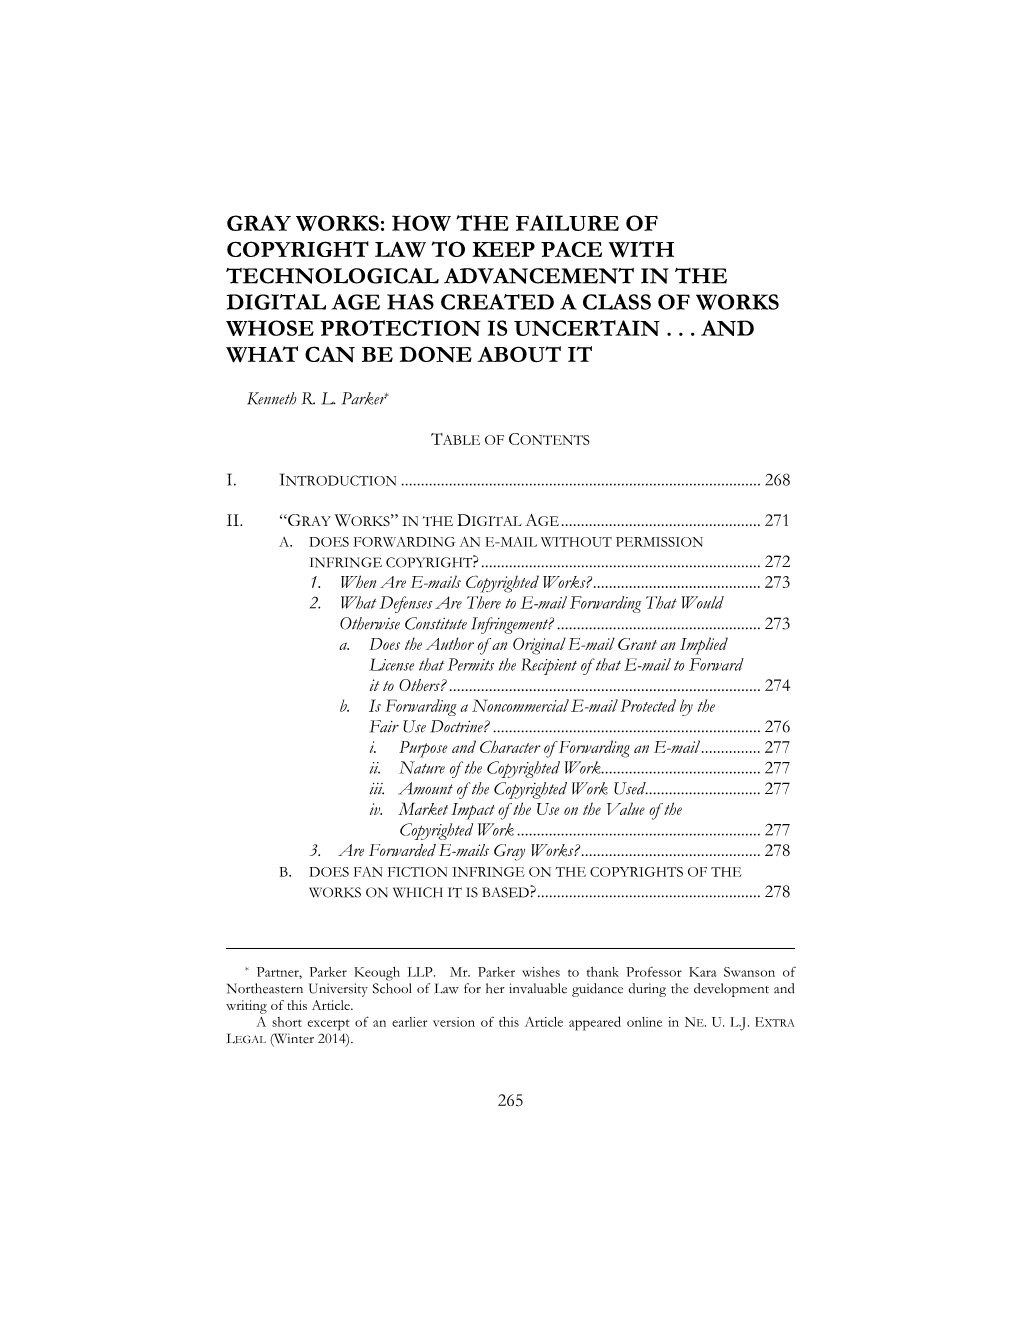 Gray Works: How the Failure of Copyright Law To